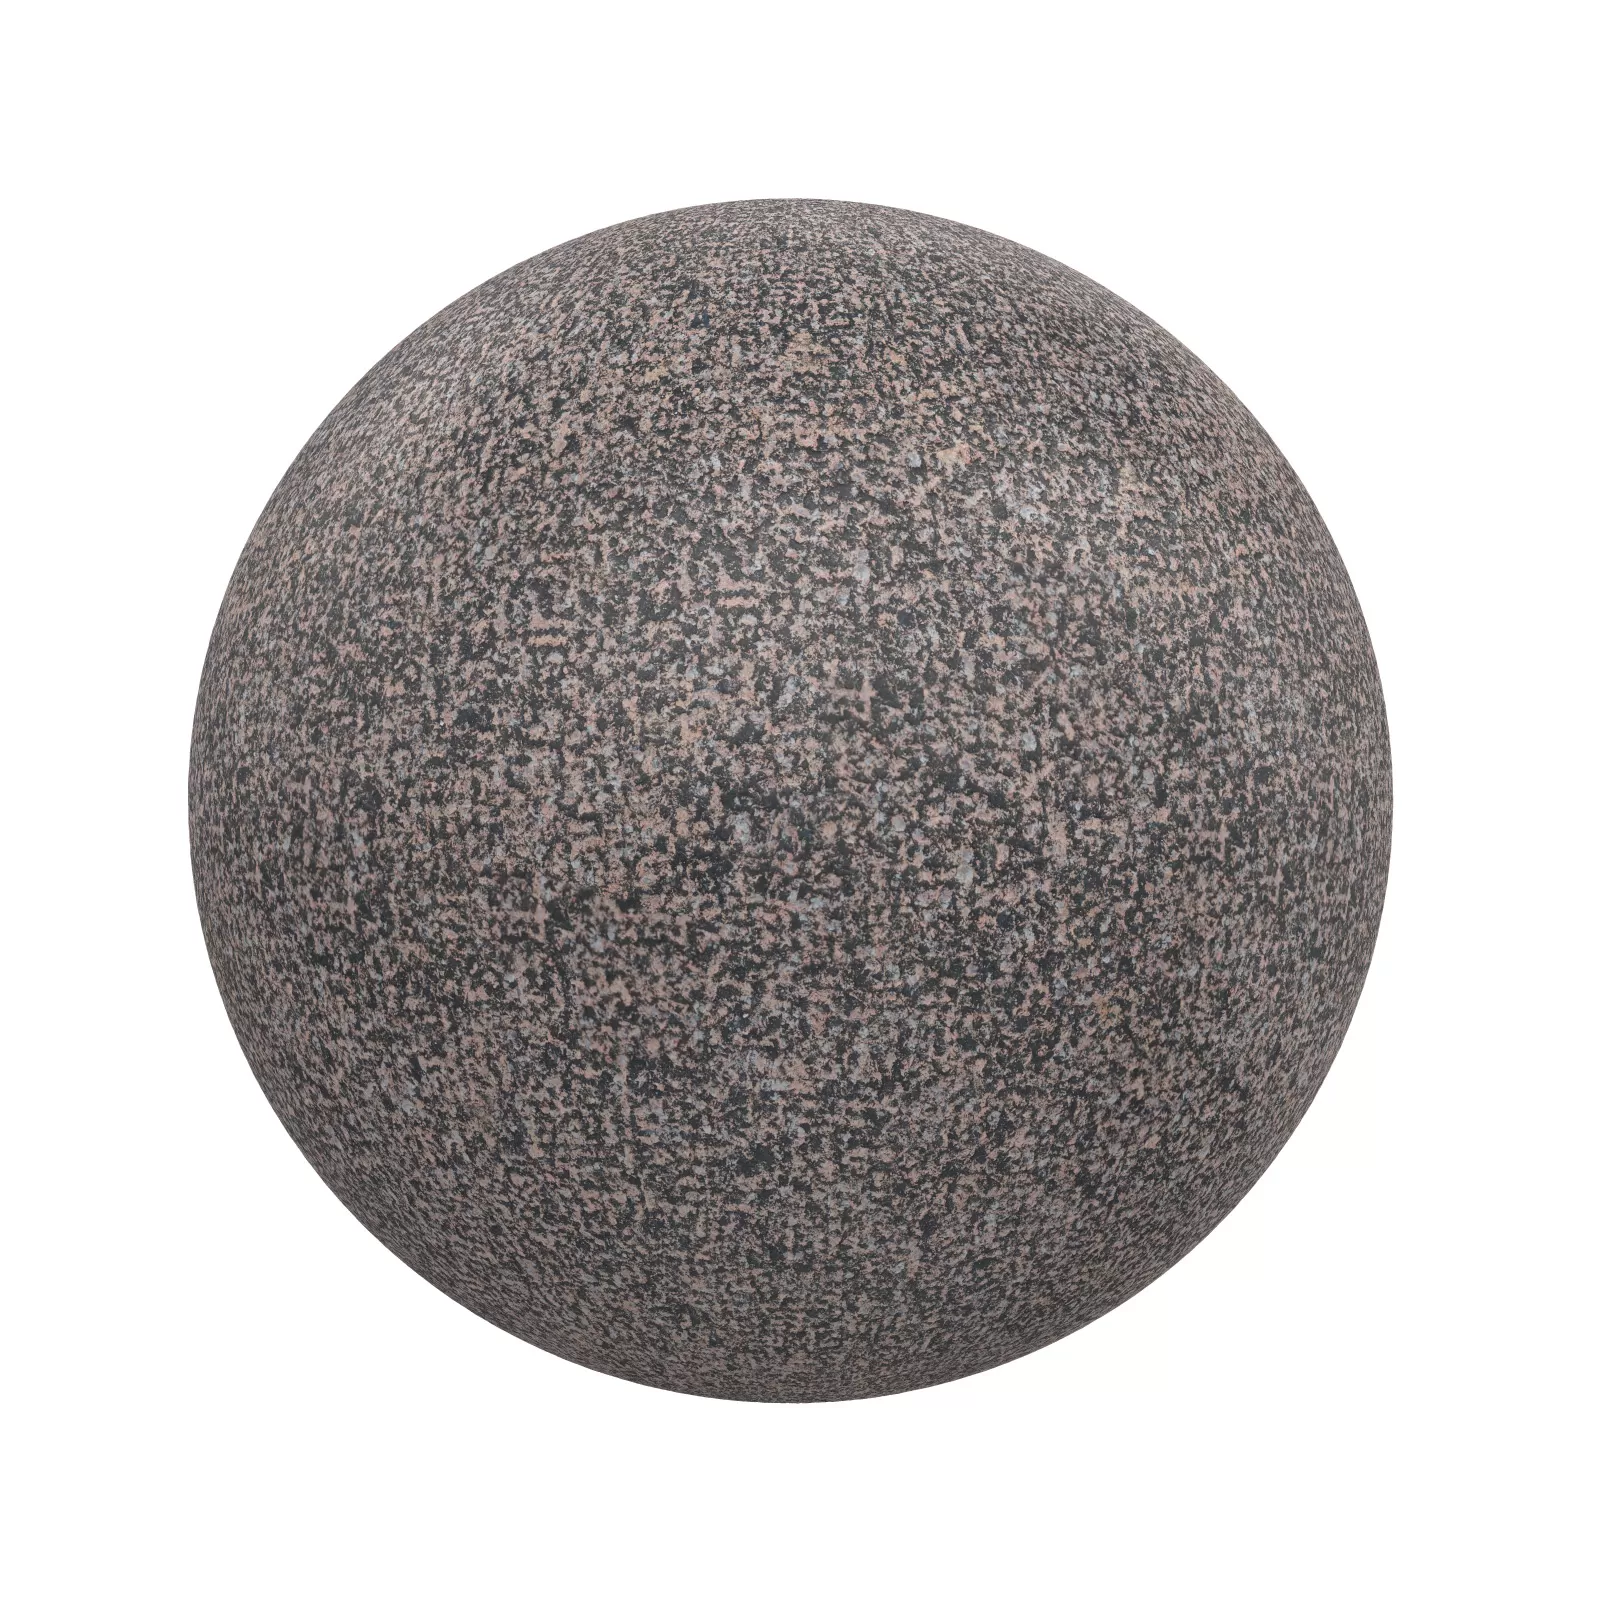 TEXTURES – STONES – CGAxis PBR Colection Vol 1 Stones – rend and black granite